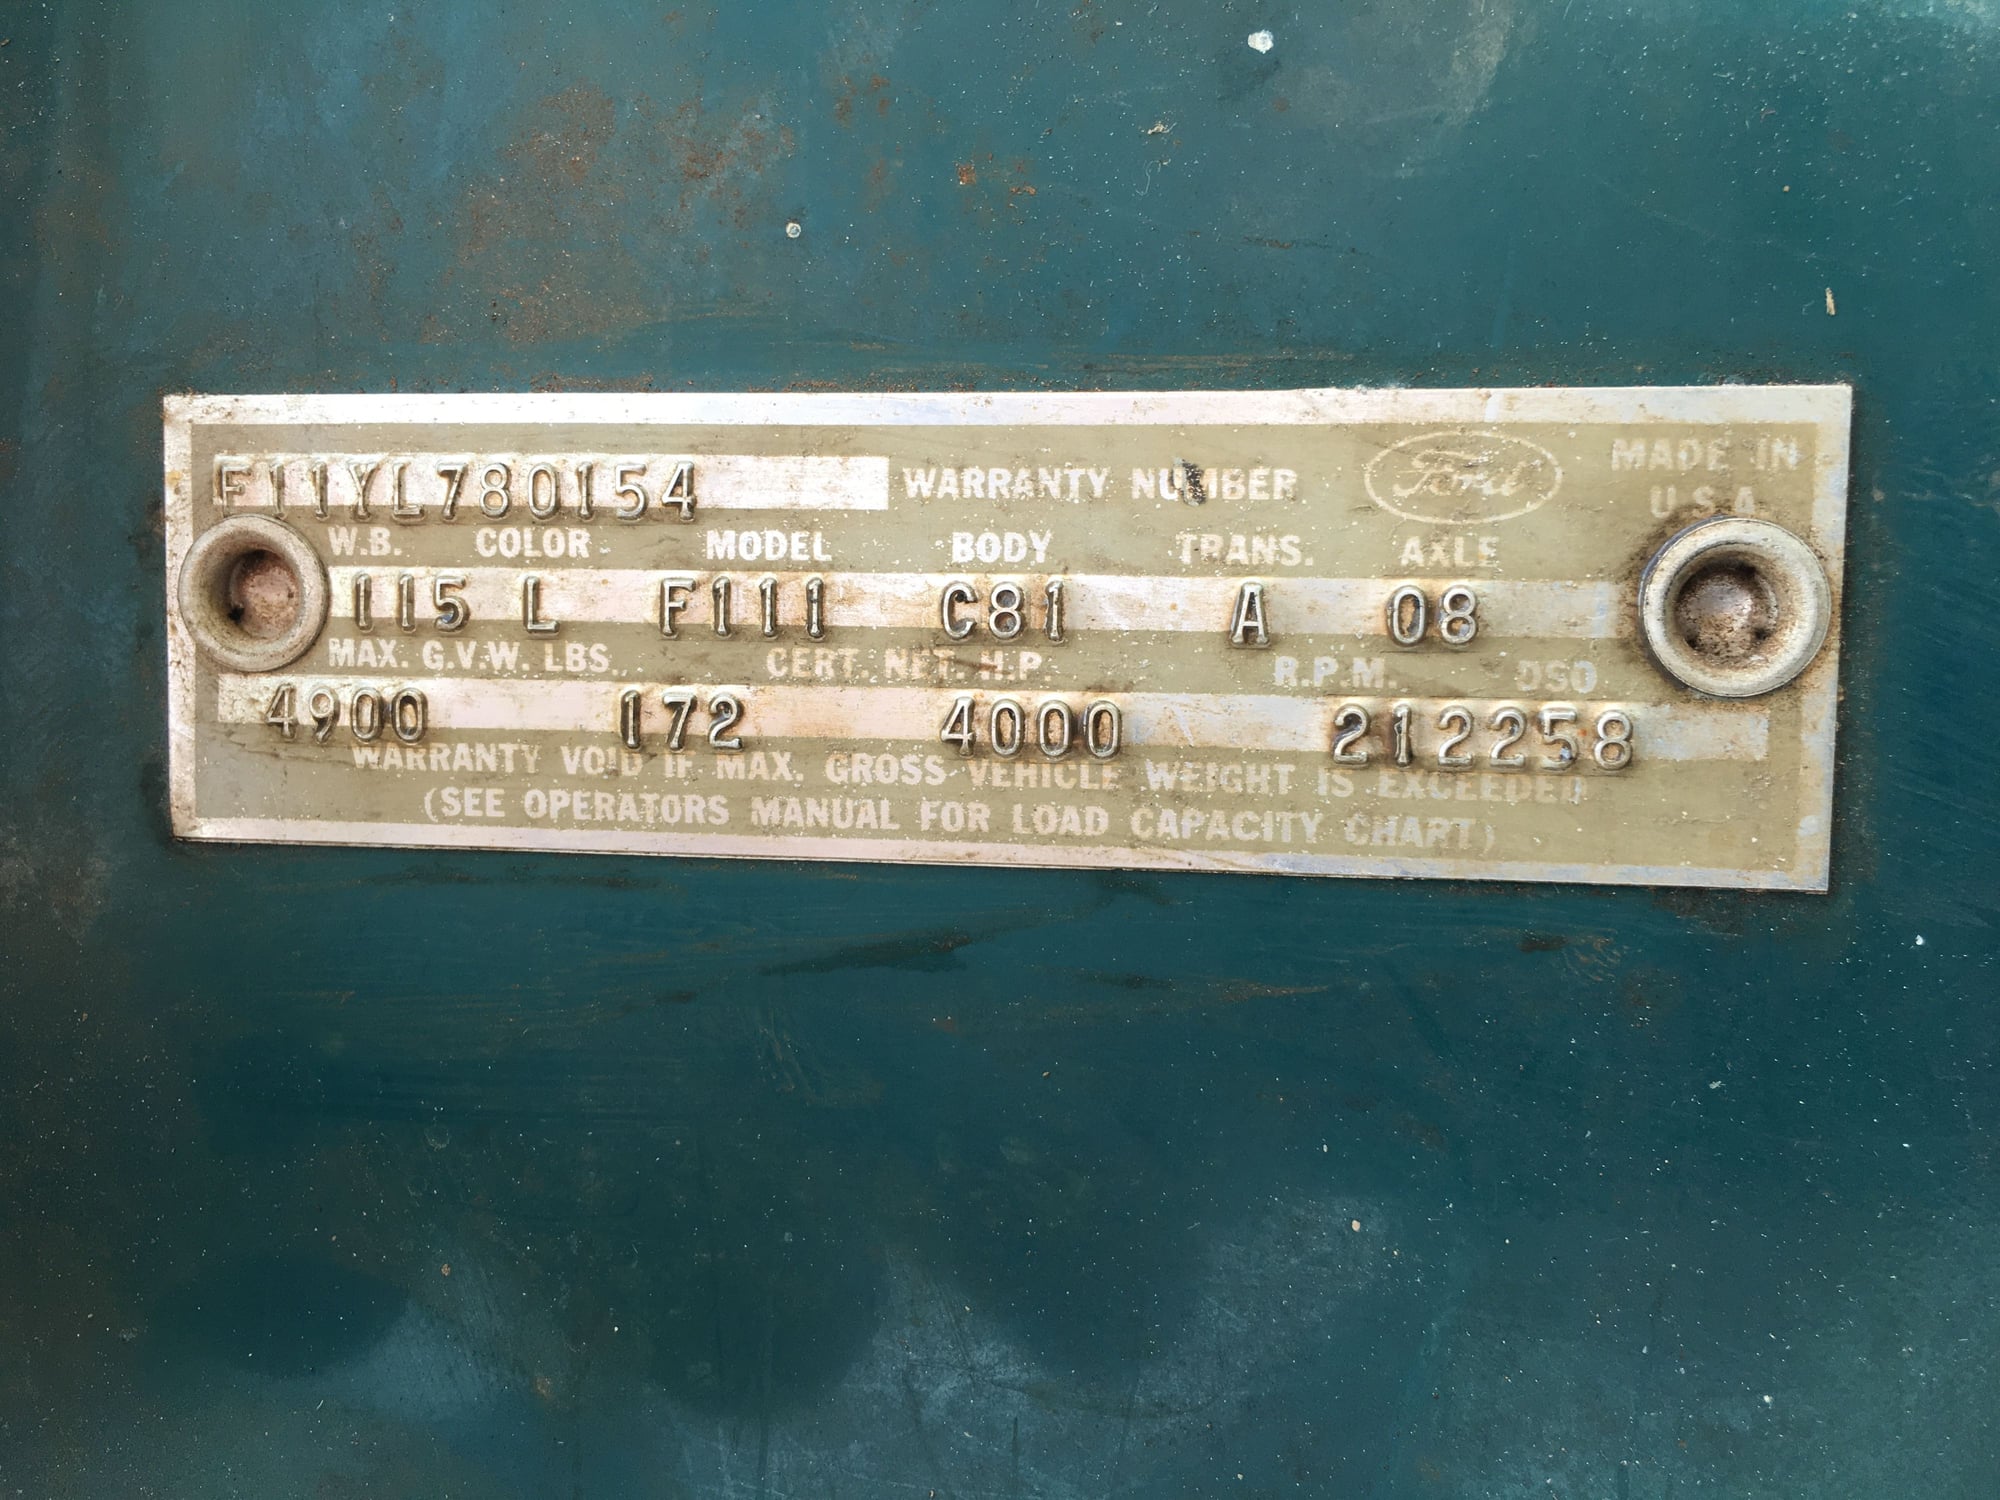 1966 f-100 4x4 body buck tag - Ford Truck Enthusiasts Forums